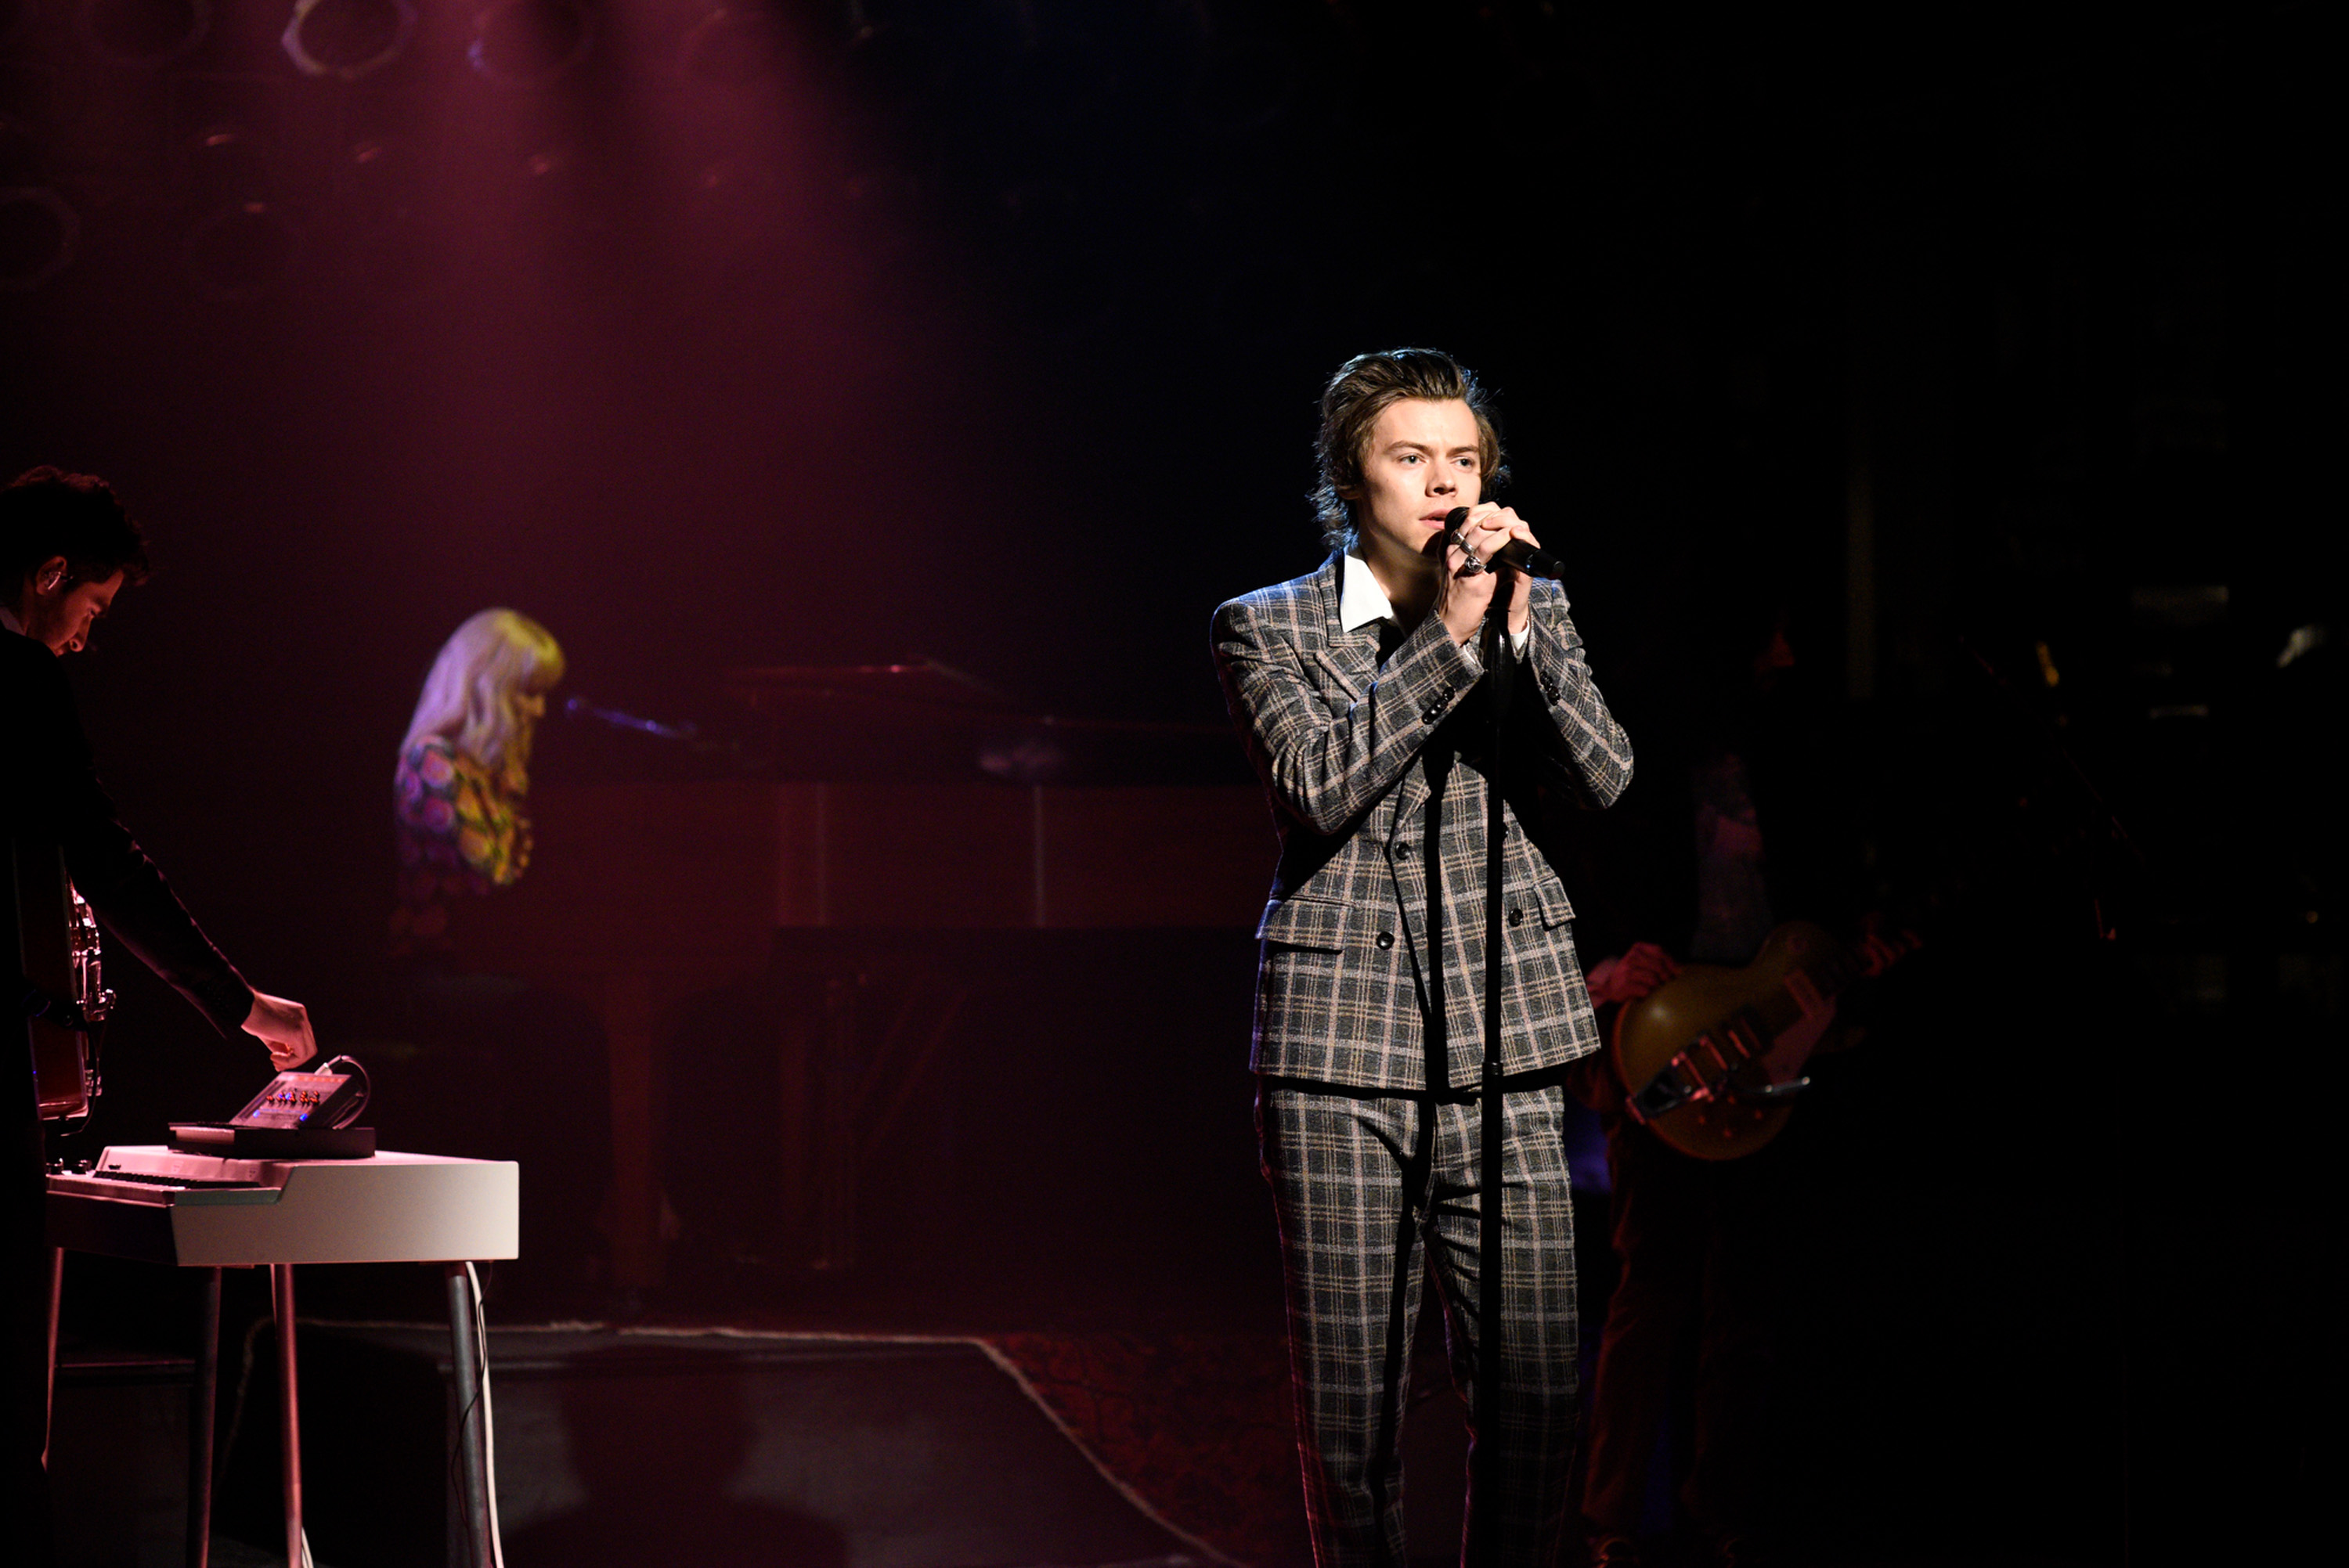 SATURDAY NIGHT LIVE -- "Jimmy Fallon" Episode 1722 -- Pictured: Musical guest Harry Styles performs "Sign of the Times" on April 15, 2017 -- (Photo by: Will Heath/NBC/NBCU Photo Bank via Getty Images) (Will Heath&mdash;NBCU Photo Bank/Getty Images)